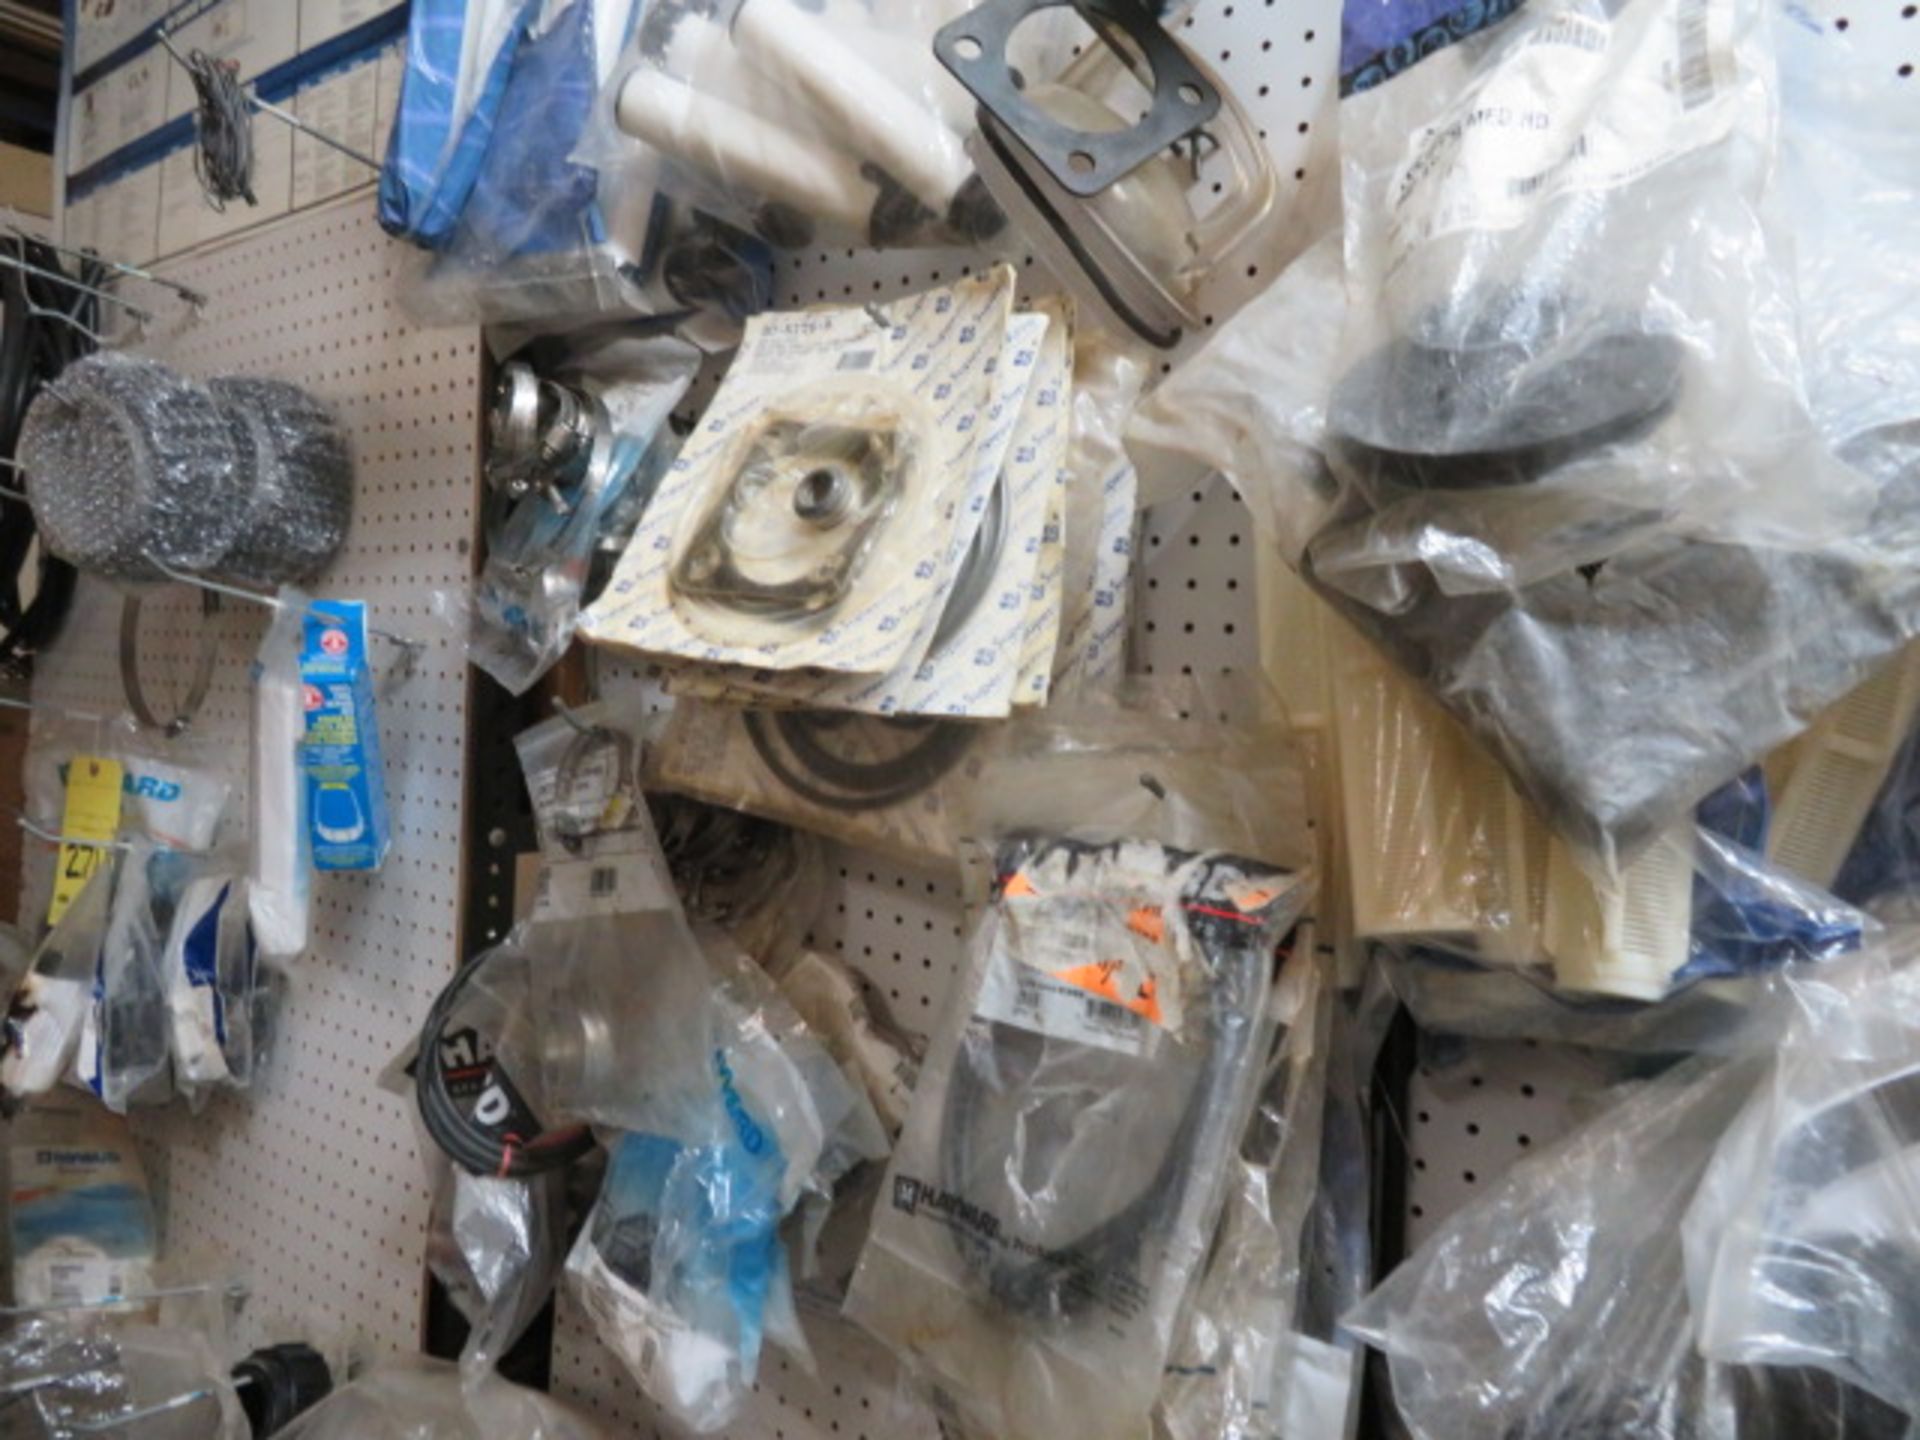 LOT CONSISTING OF: pool sweep, filter parts, pump parts, table chlorinator parts, assorted - Image 9 of 17